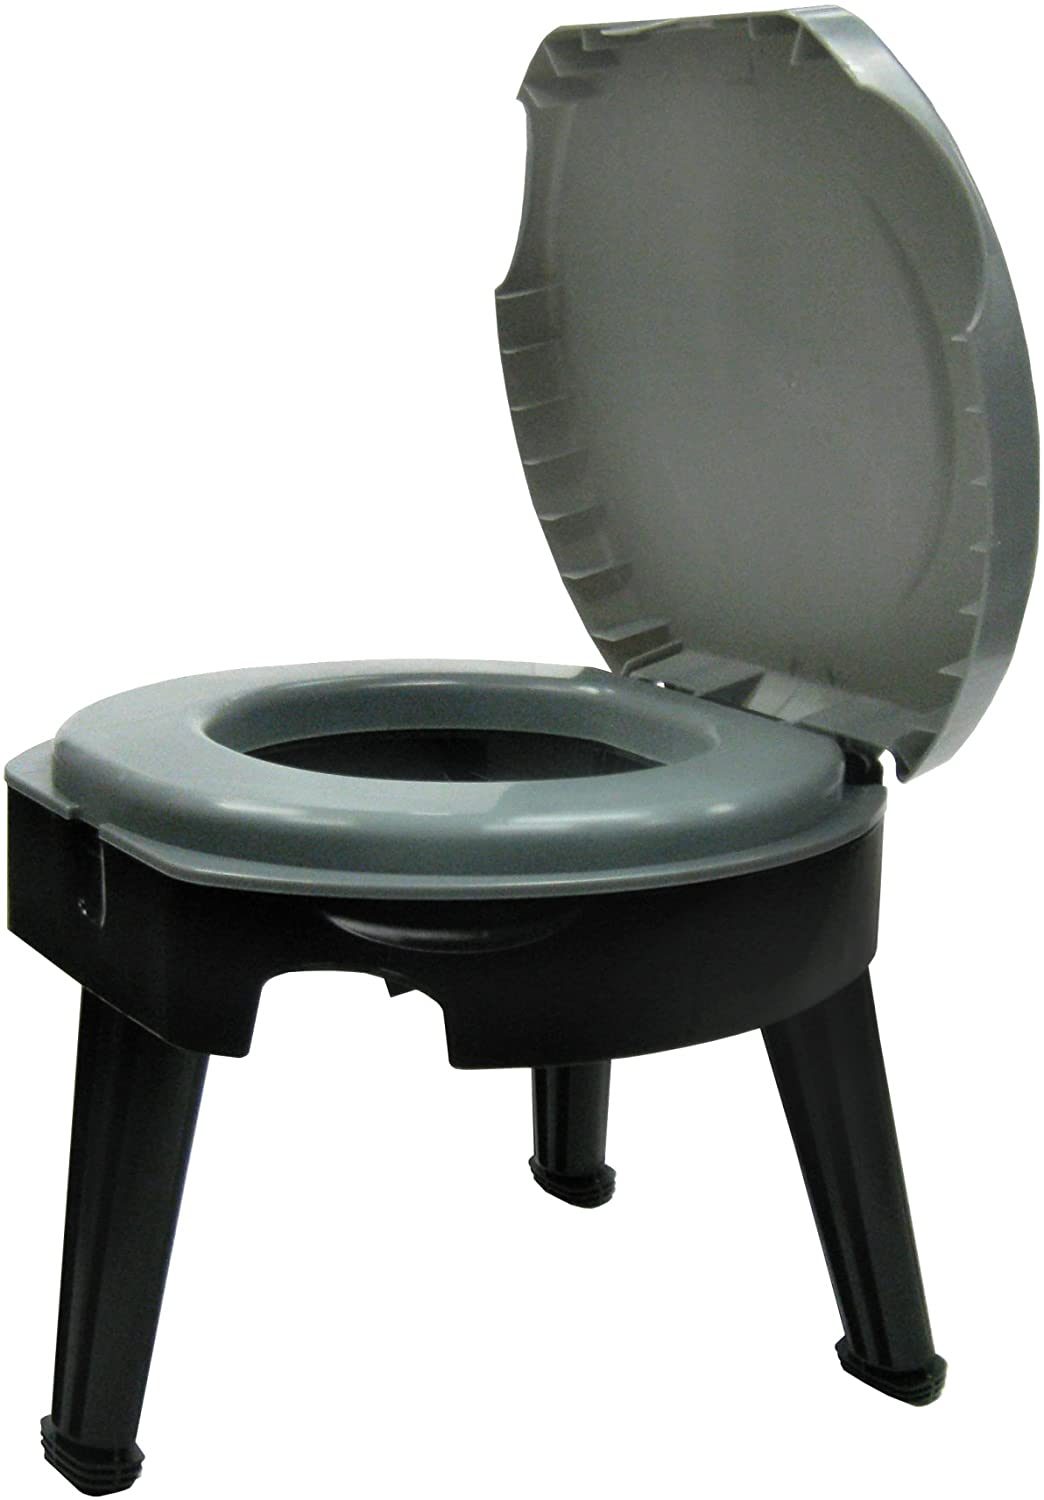 Reliance Products Collapsible Portable Toilet